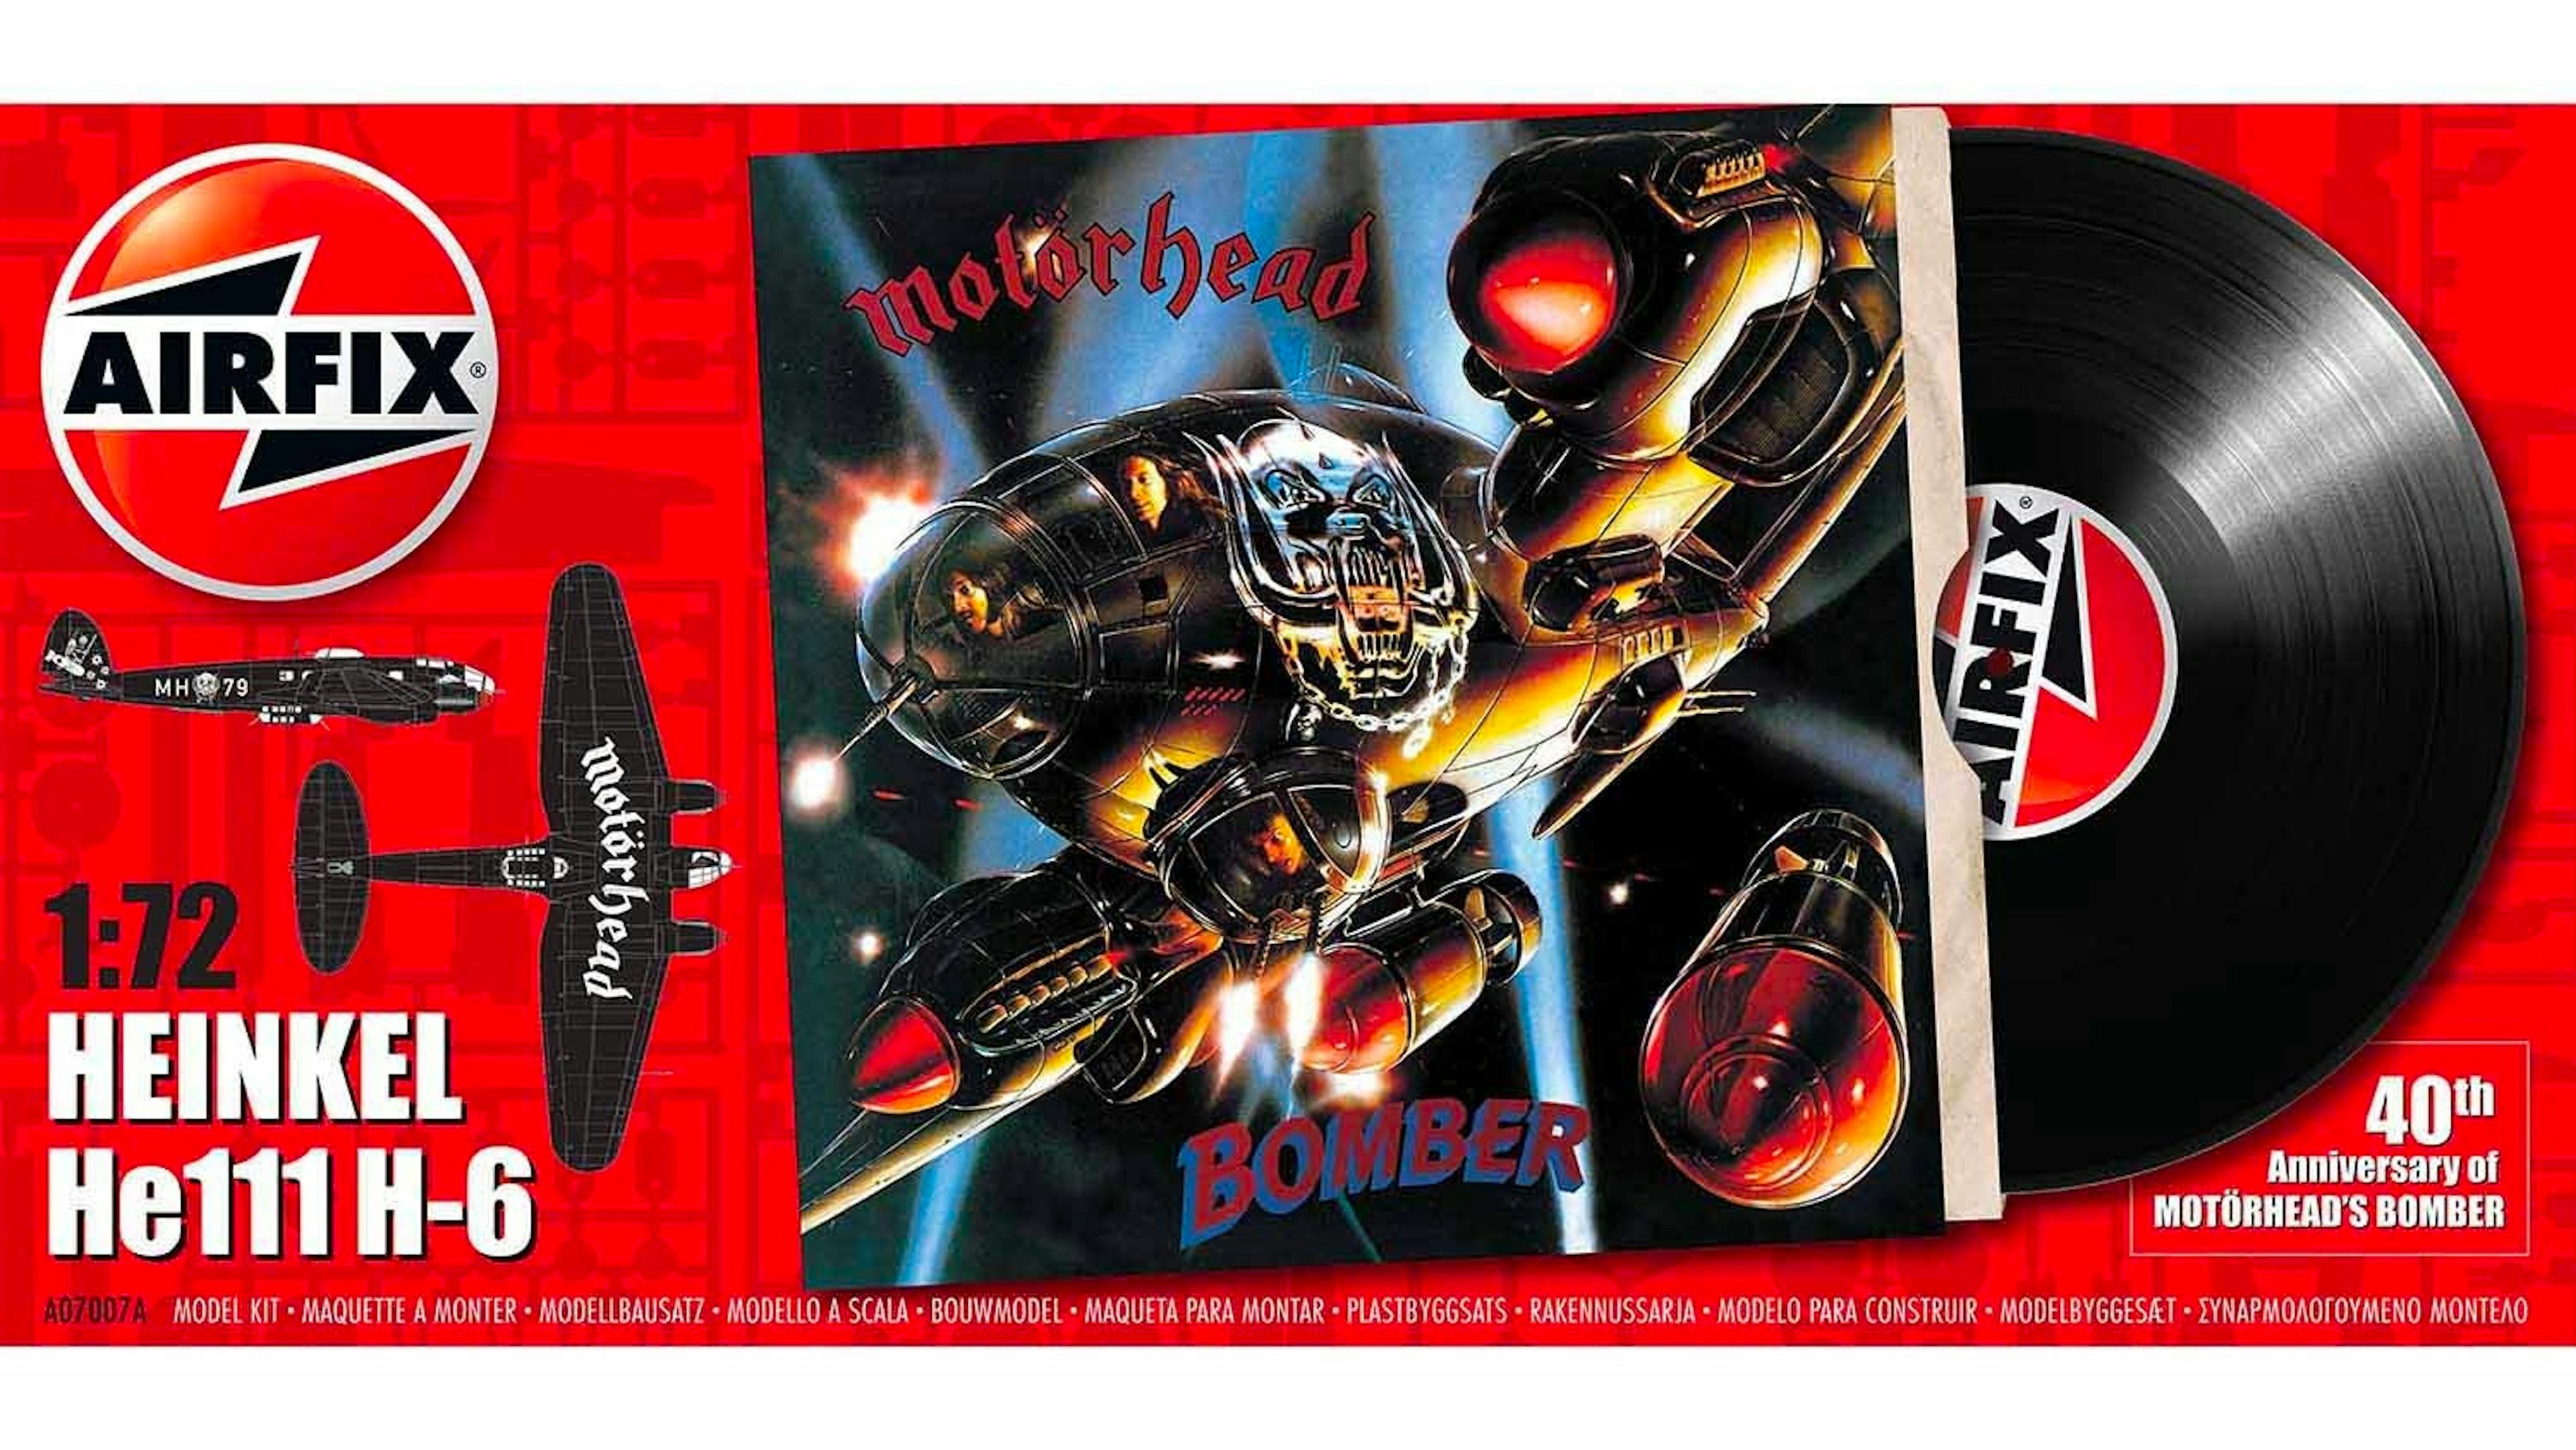 You Can Now Get An Airfix Model Of Motörhead's Bomber